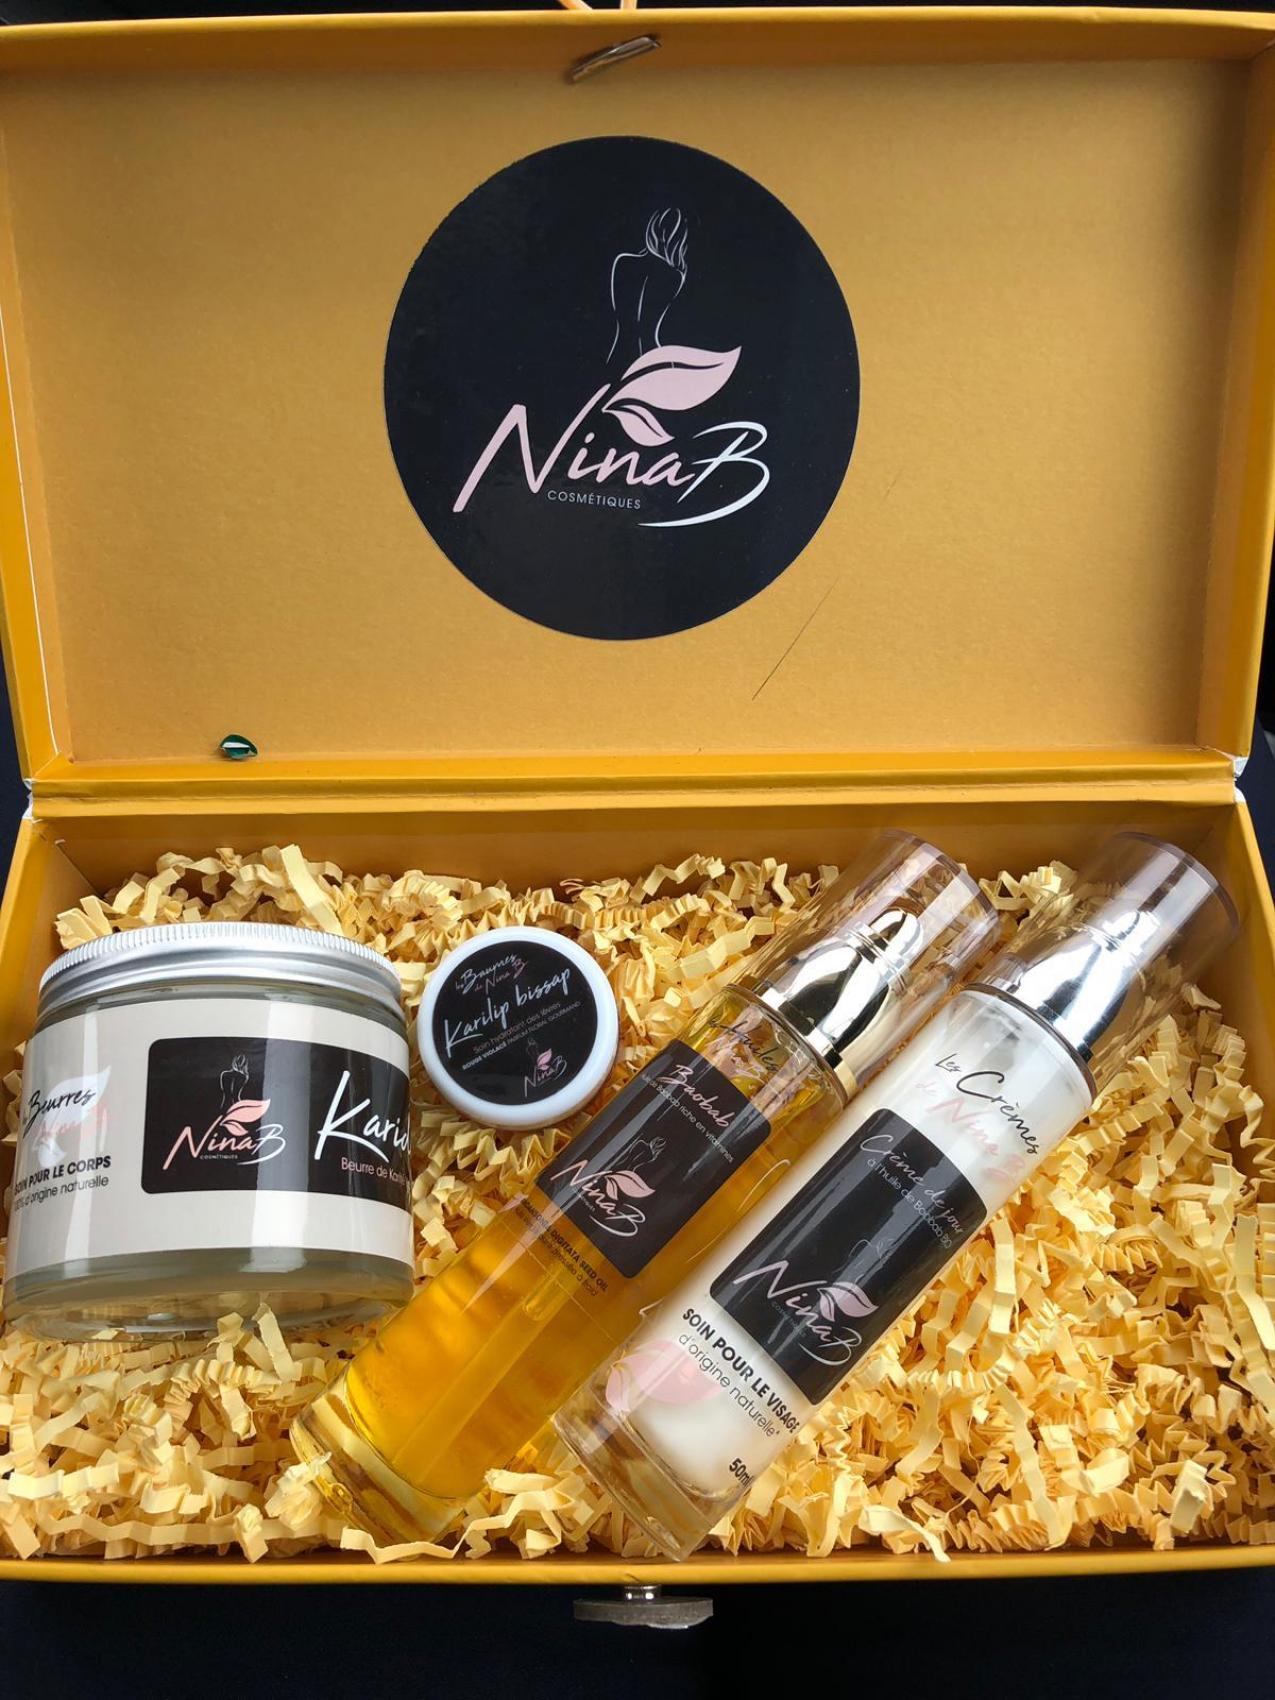 Nina B Cosmetics, a brand committed to the well-being of women around the world